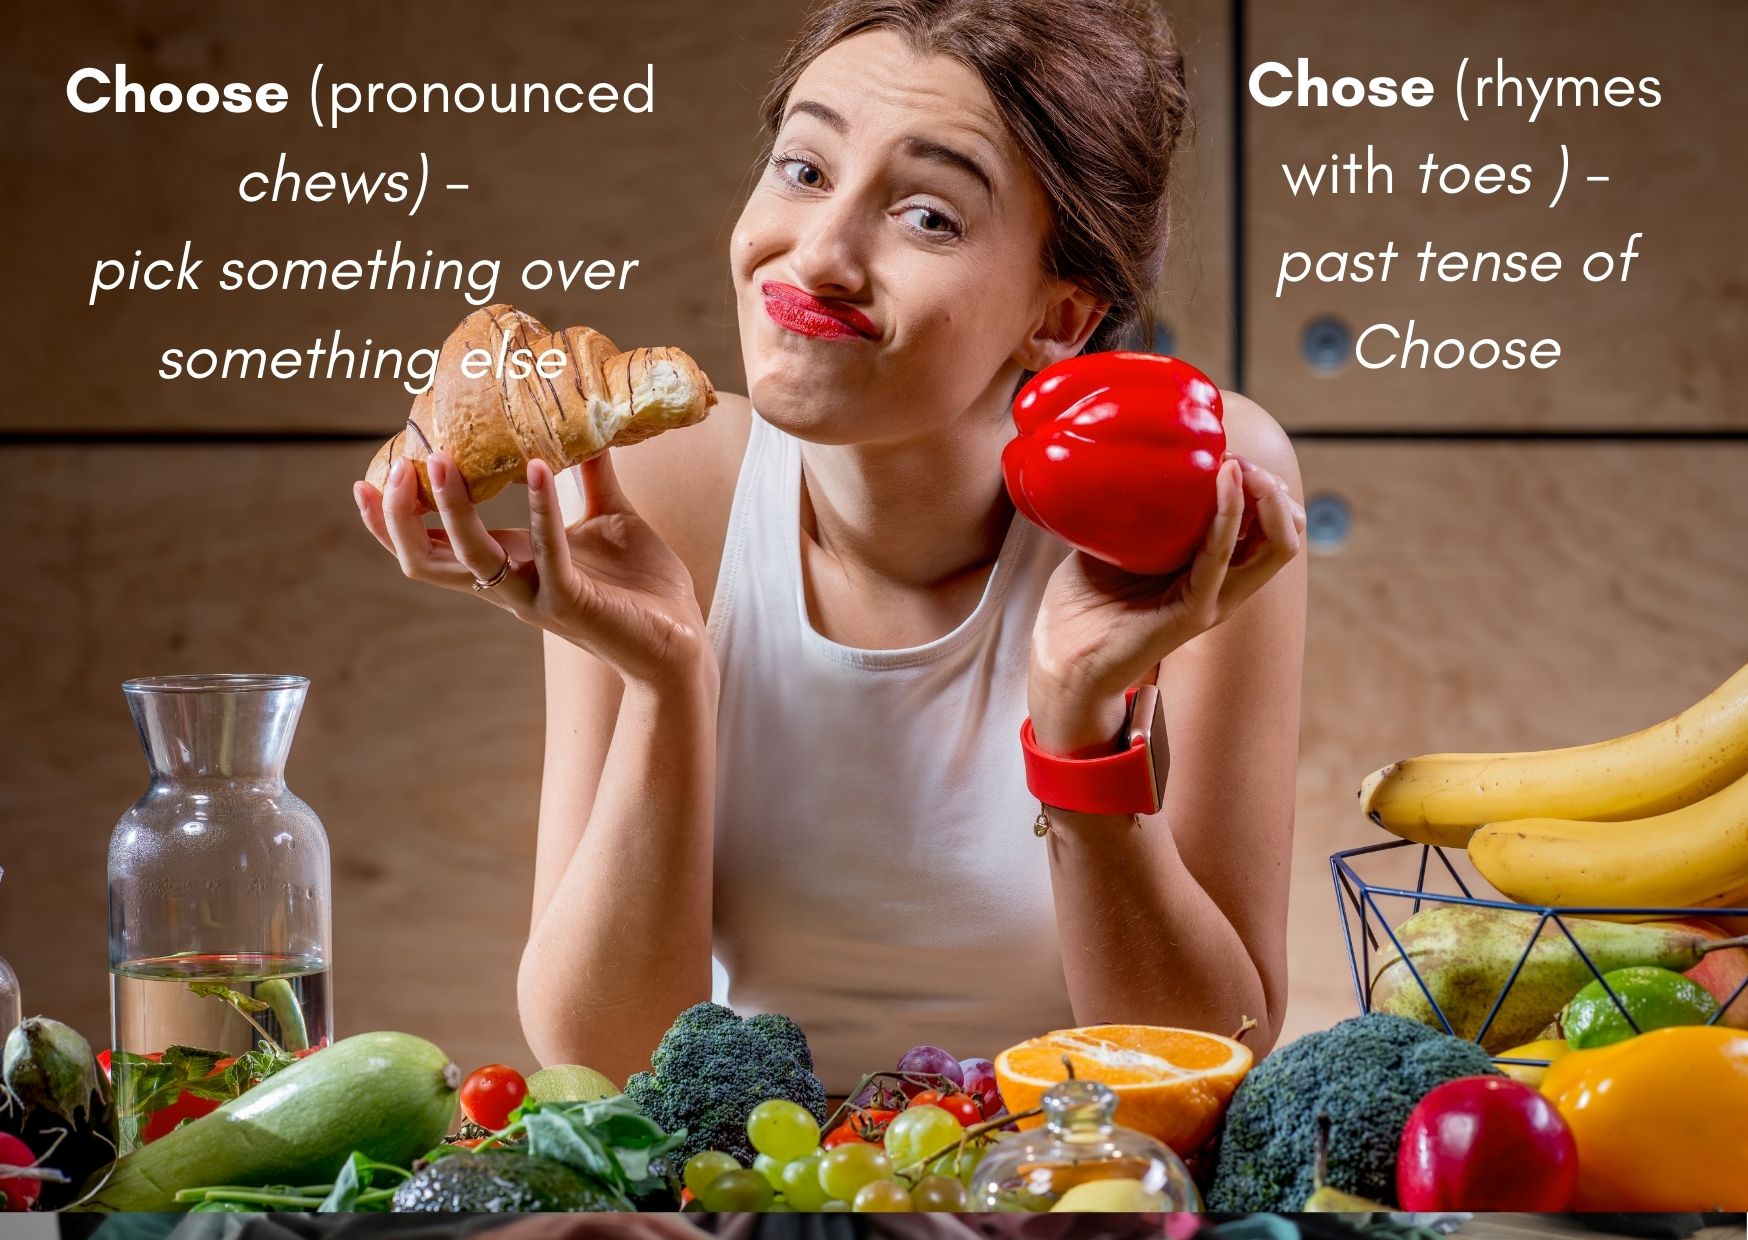 A graphic of a girl holding a croissant and an apple with the captions: "Choose (pronounced chews) is to select on thing over the other. Chose (rhymes with toes) is the past tense of choose